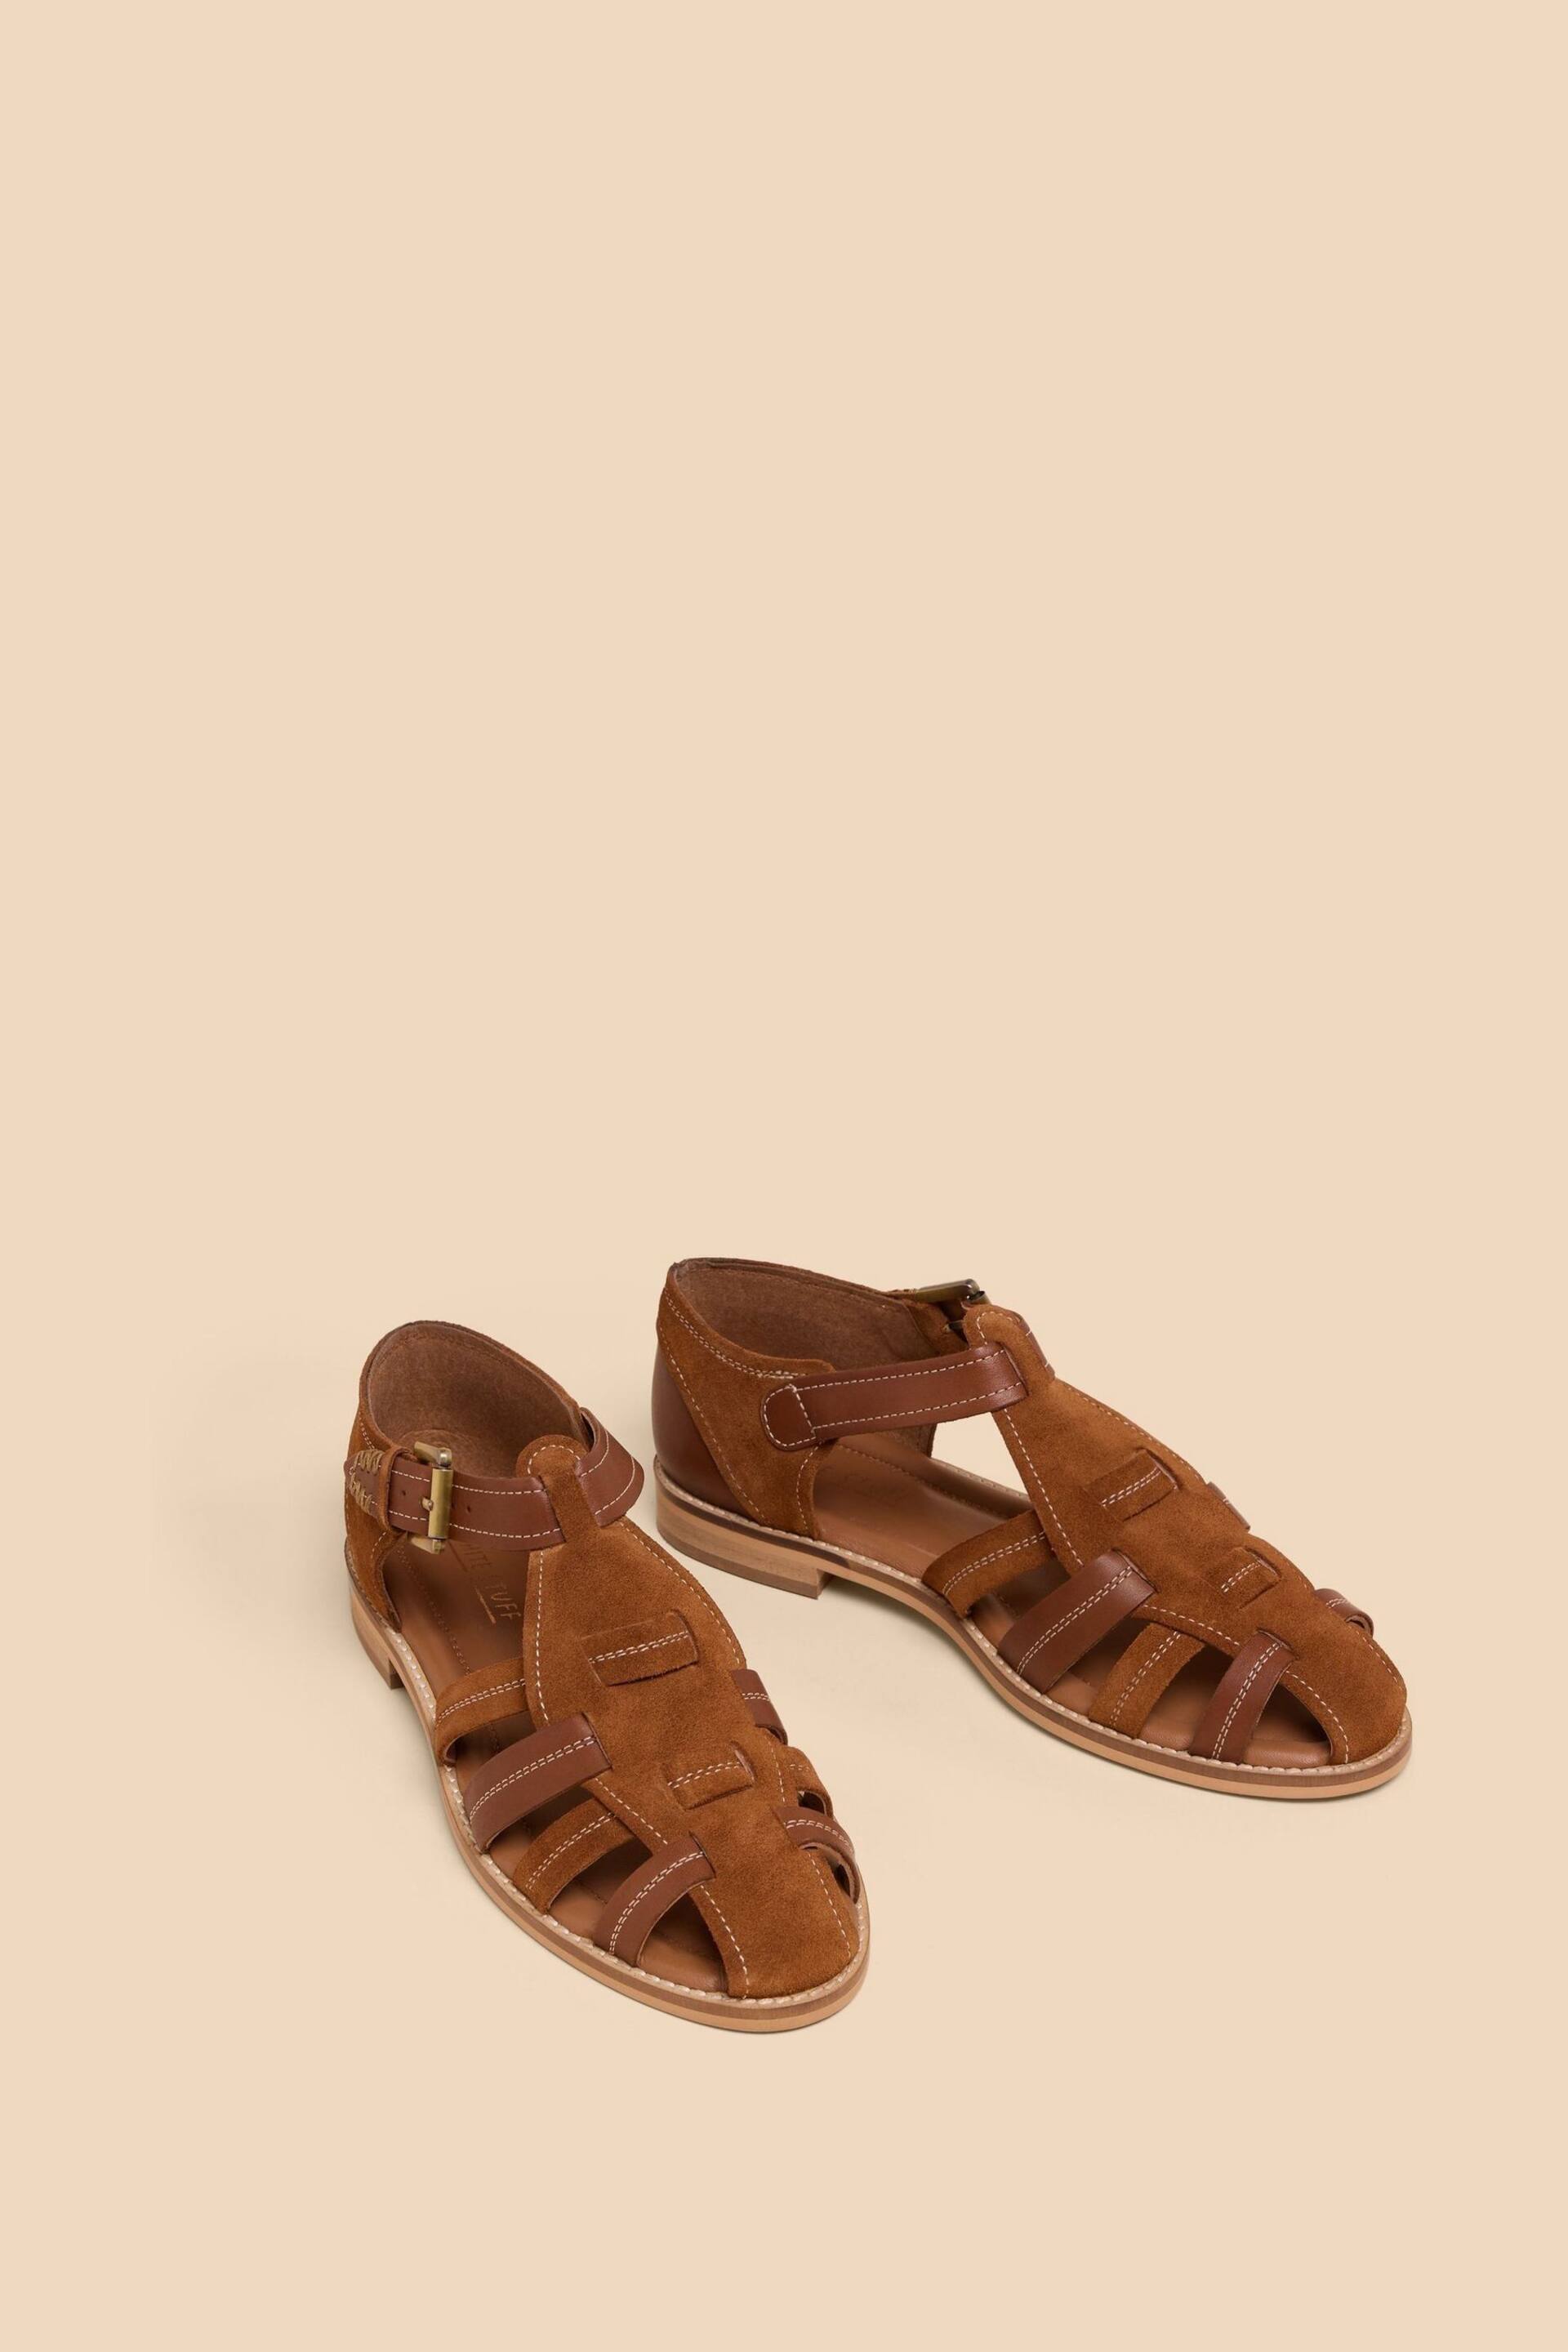 White Stuff Brown Floral Leather Fisherman Sandals - Image 2 of 4